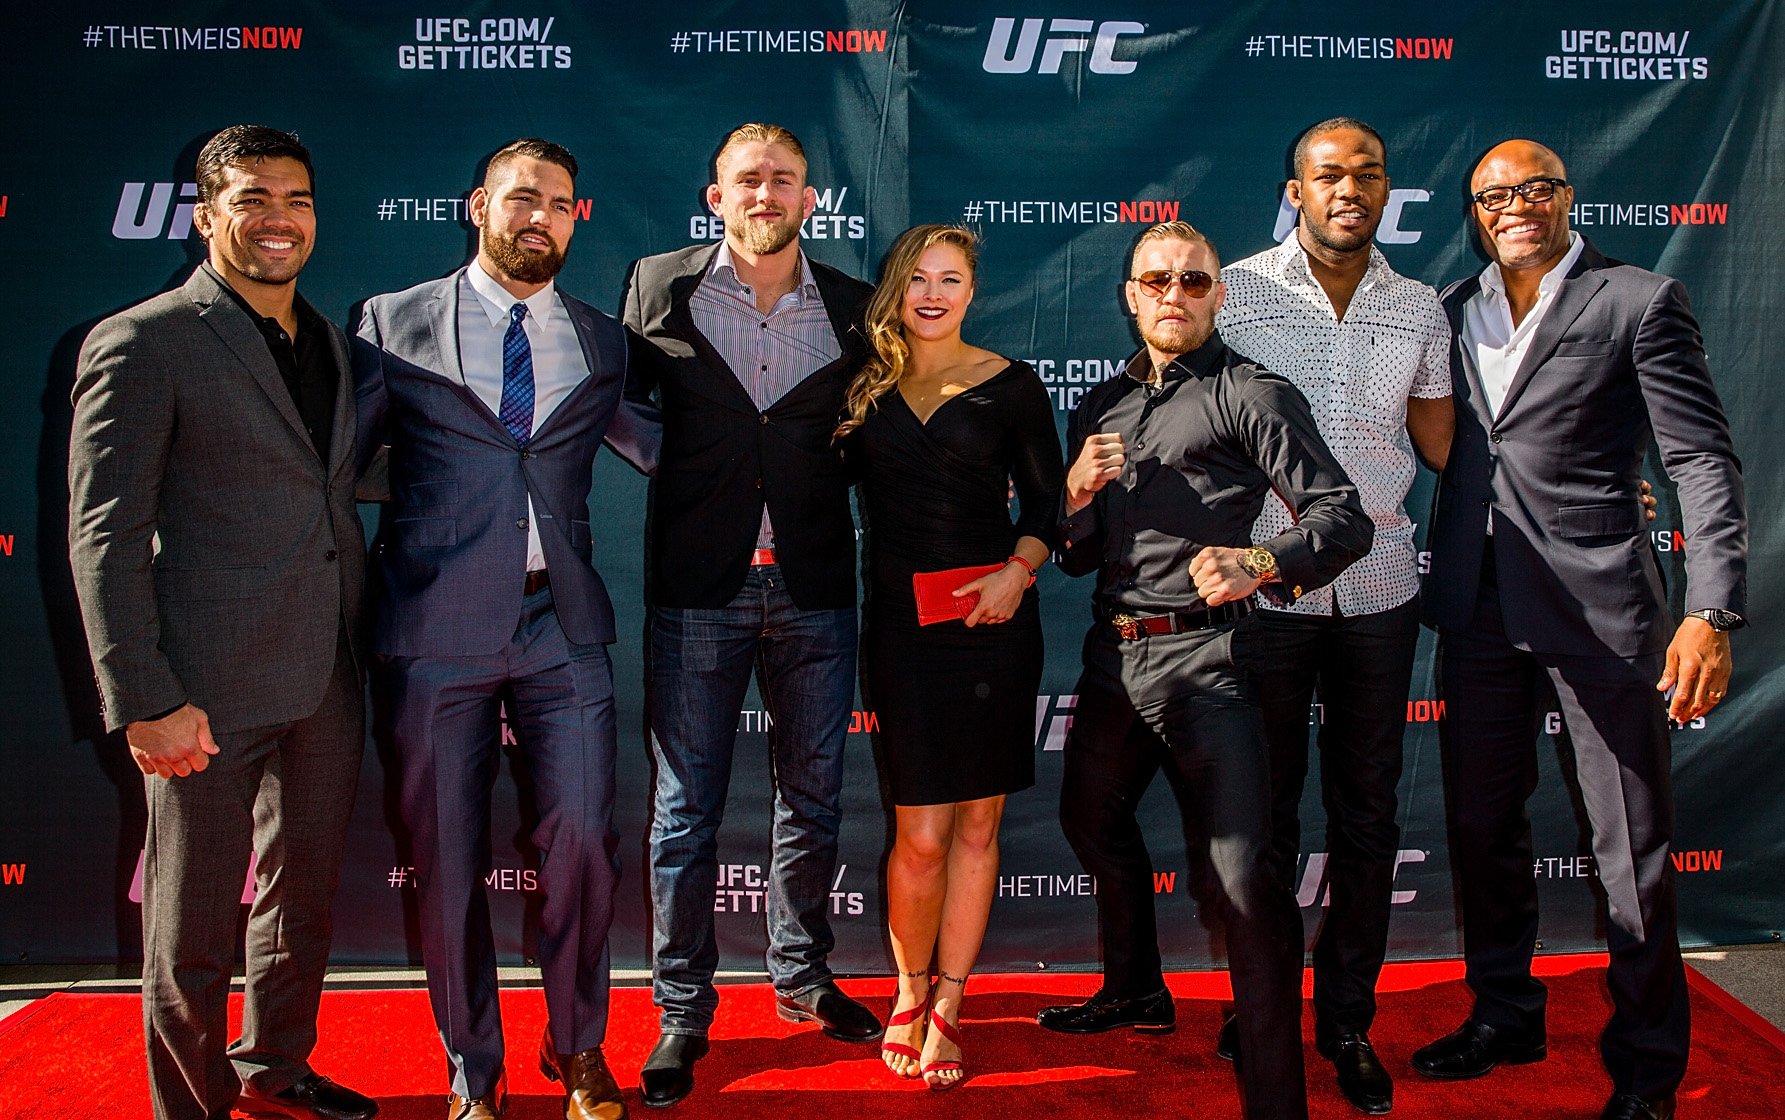 Ronda Rousey (fourth from left) and Conor McGregor (third from right) stand with other UFC fighters in Las Vegas, on Nov. 17, 2014. (Zuffa LLC/Getty Images)